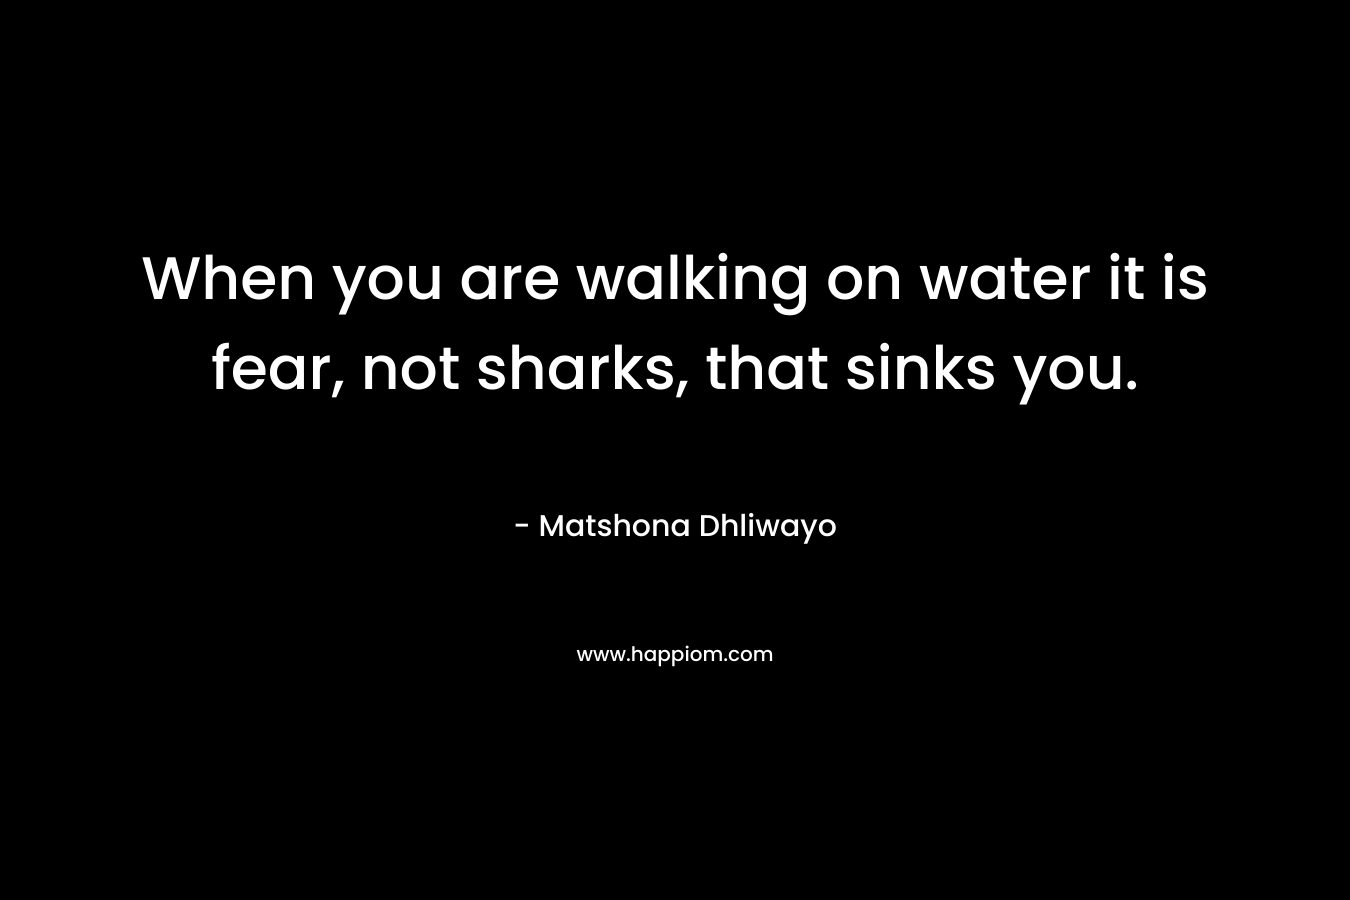 When you are walking on water it is fear, not sharks, that sinks you. – Matshona Dhliwayo